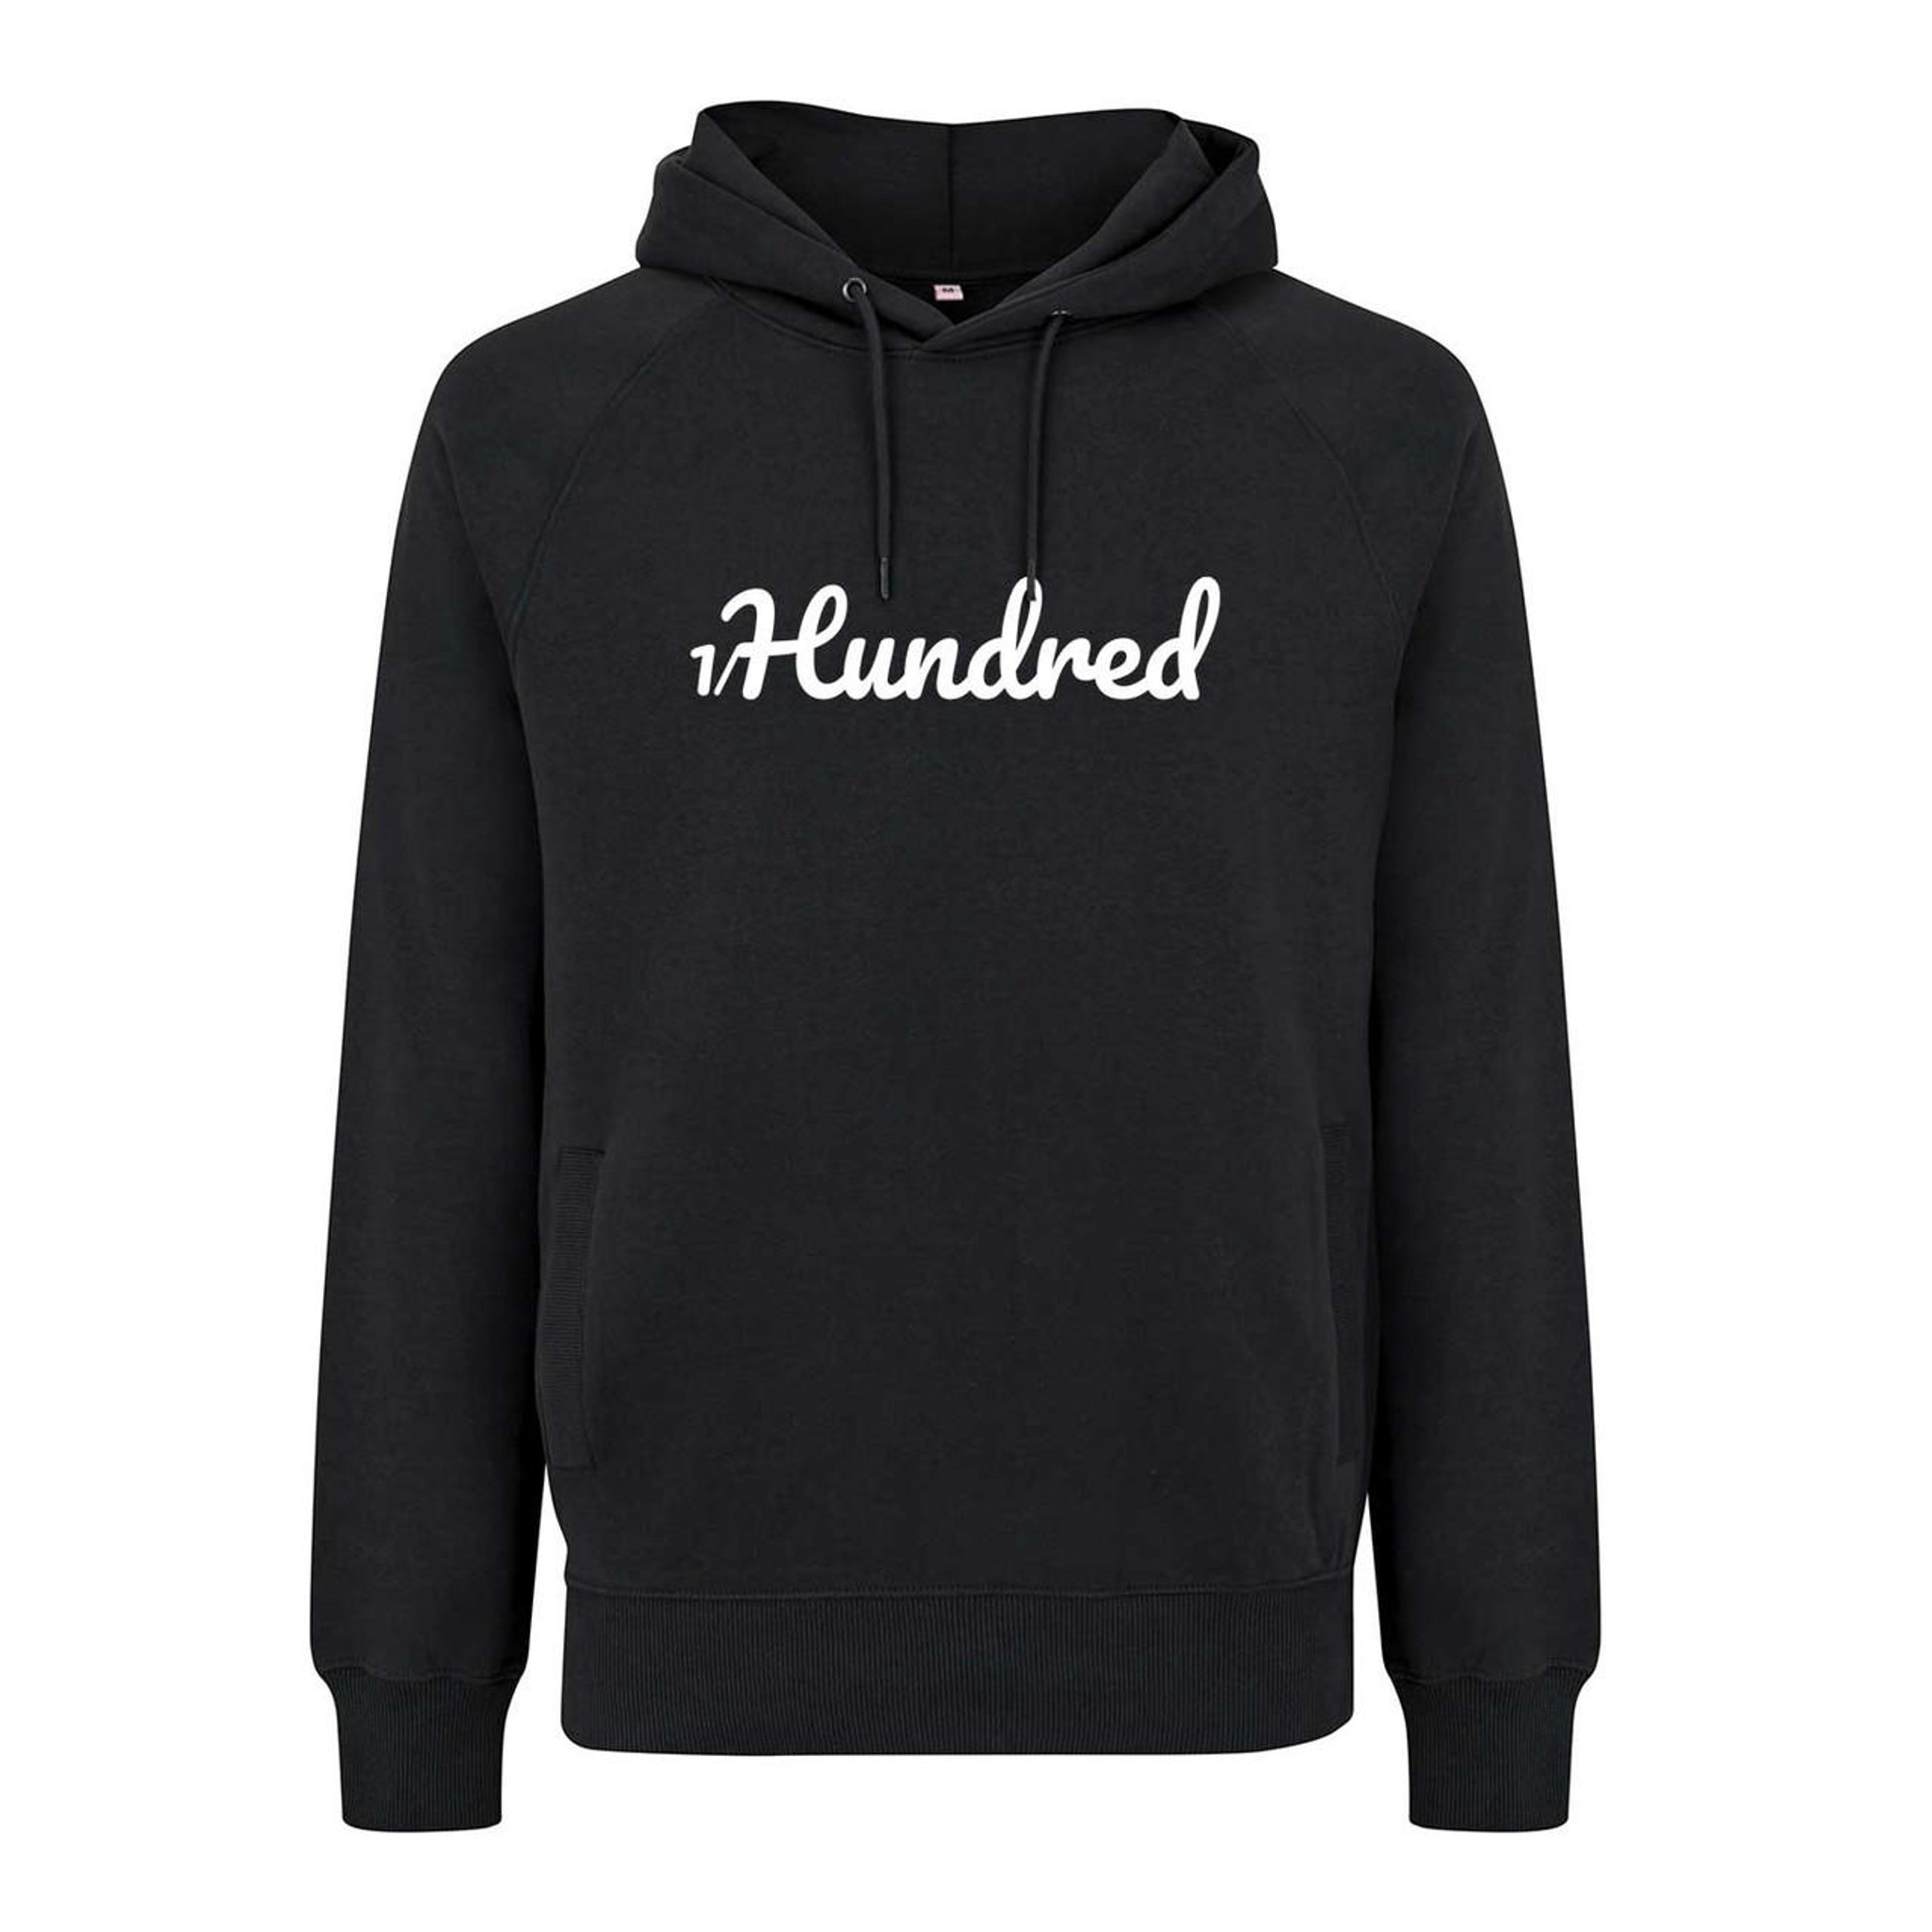 Buy Special Edition Sweatshirts Online UK - We Are 1 of 100